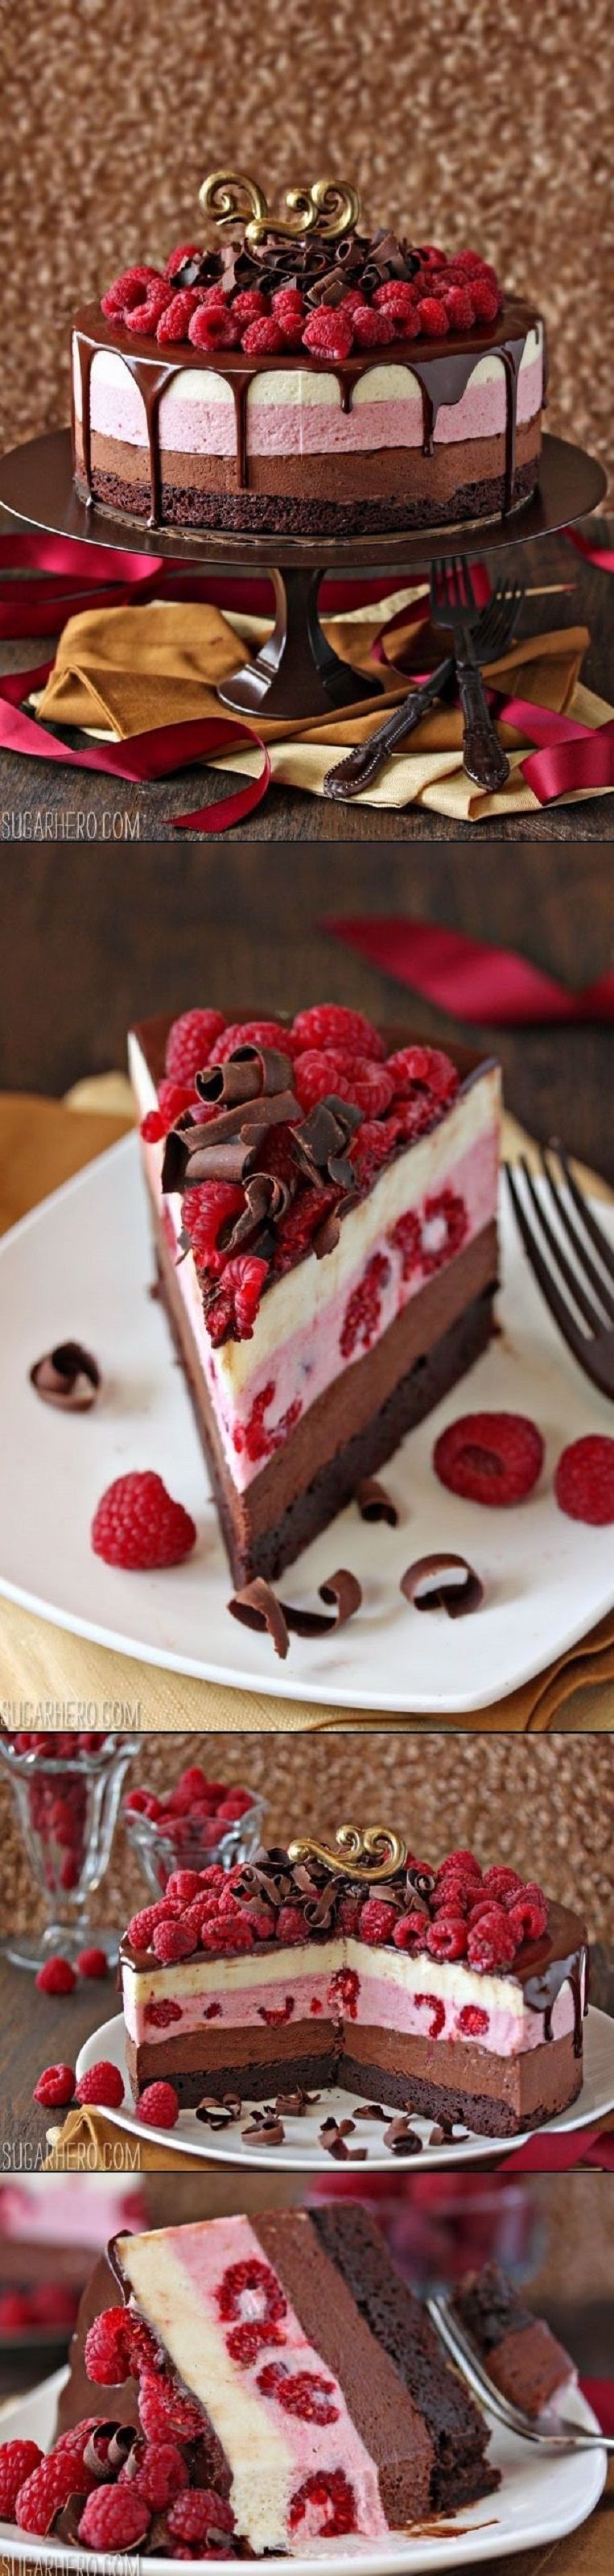 Chocolate Raspberry Mousse Cake – 16 Deliciously Different Fruit Desserts for Summer | GleamItUp